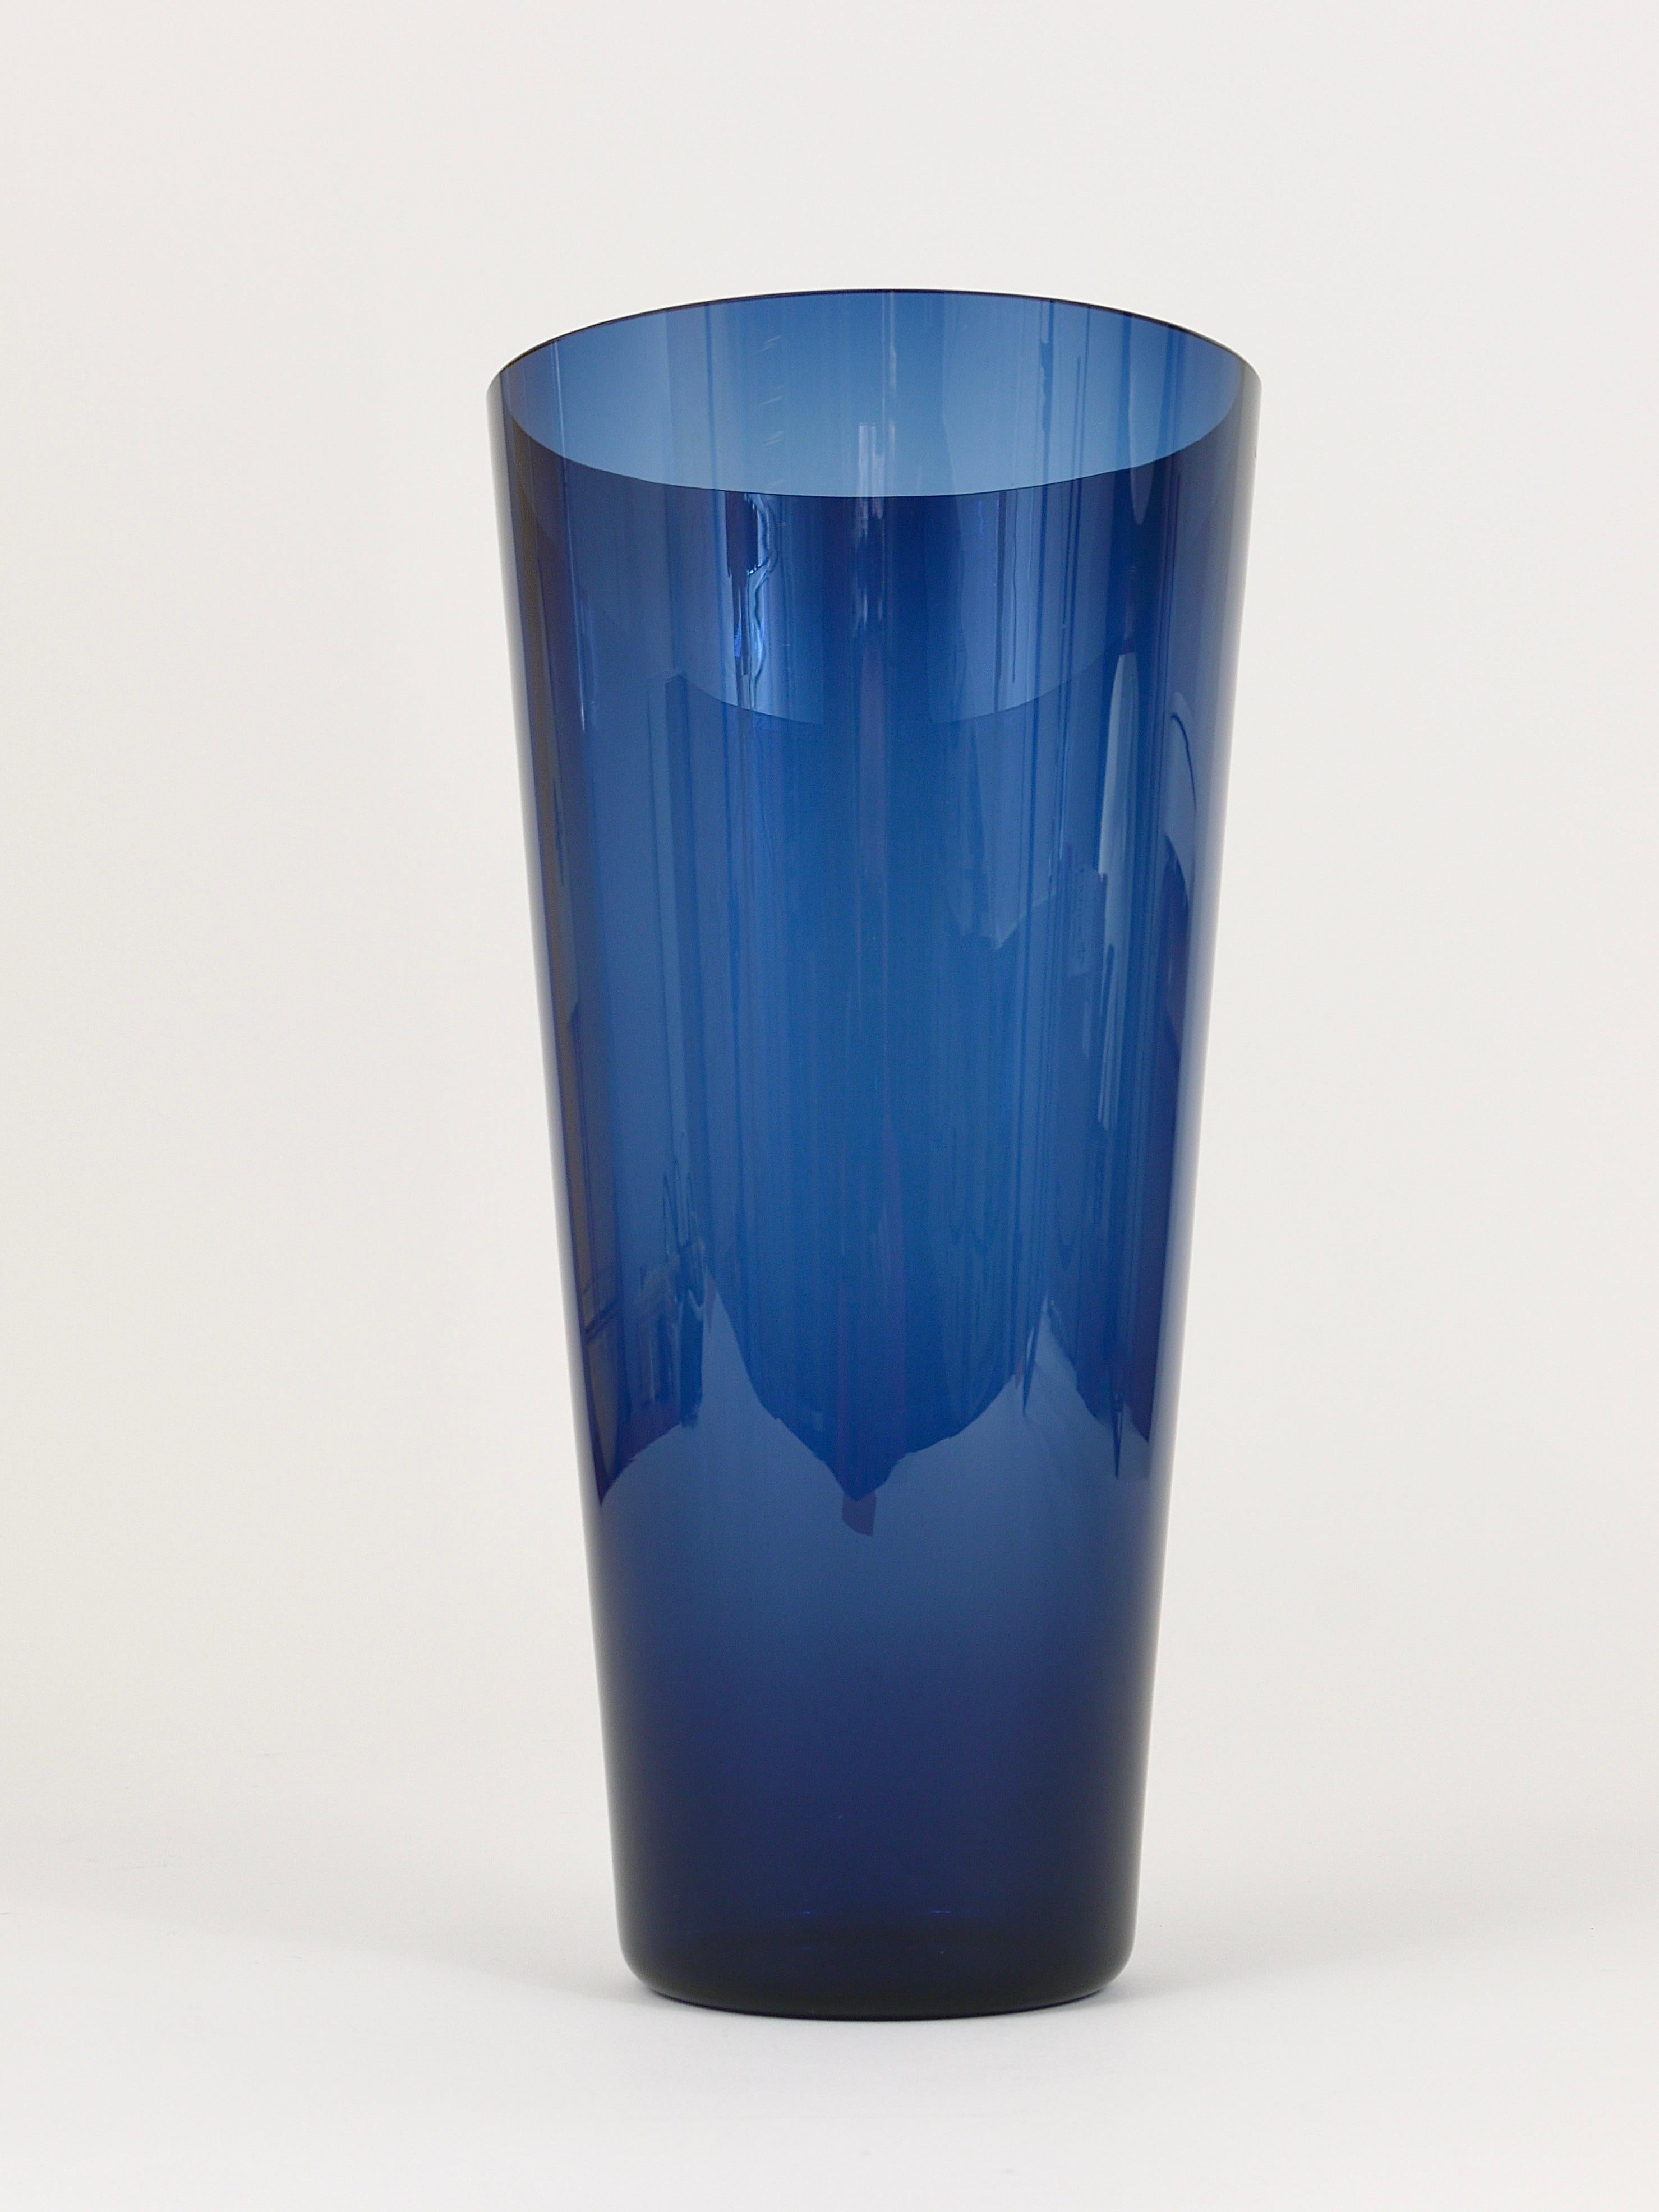 A fine, large 11 1/2 inches high Kartio flower vase in blue from the 1950s. Designed by Kaj Franck, executed by Nuutajarvi Nottsjo Finland. In excellent condition.